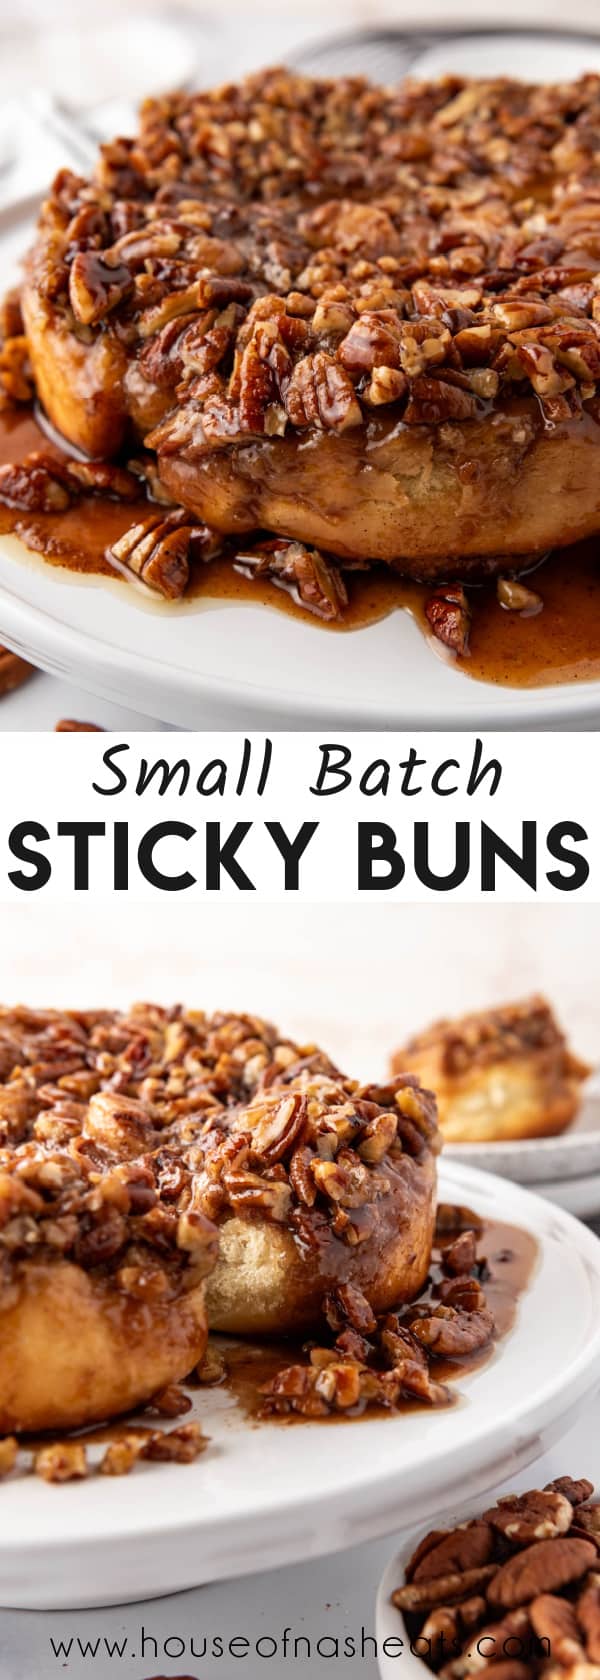 A collage of images of sticky buns with text overlay.